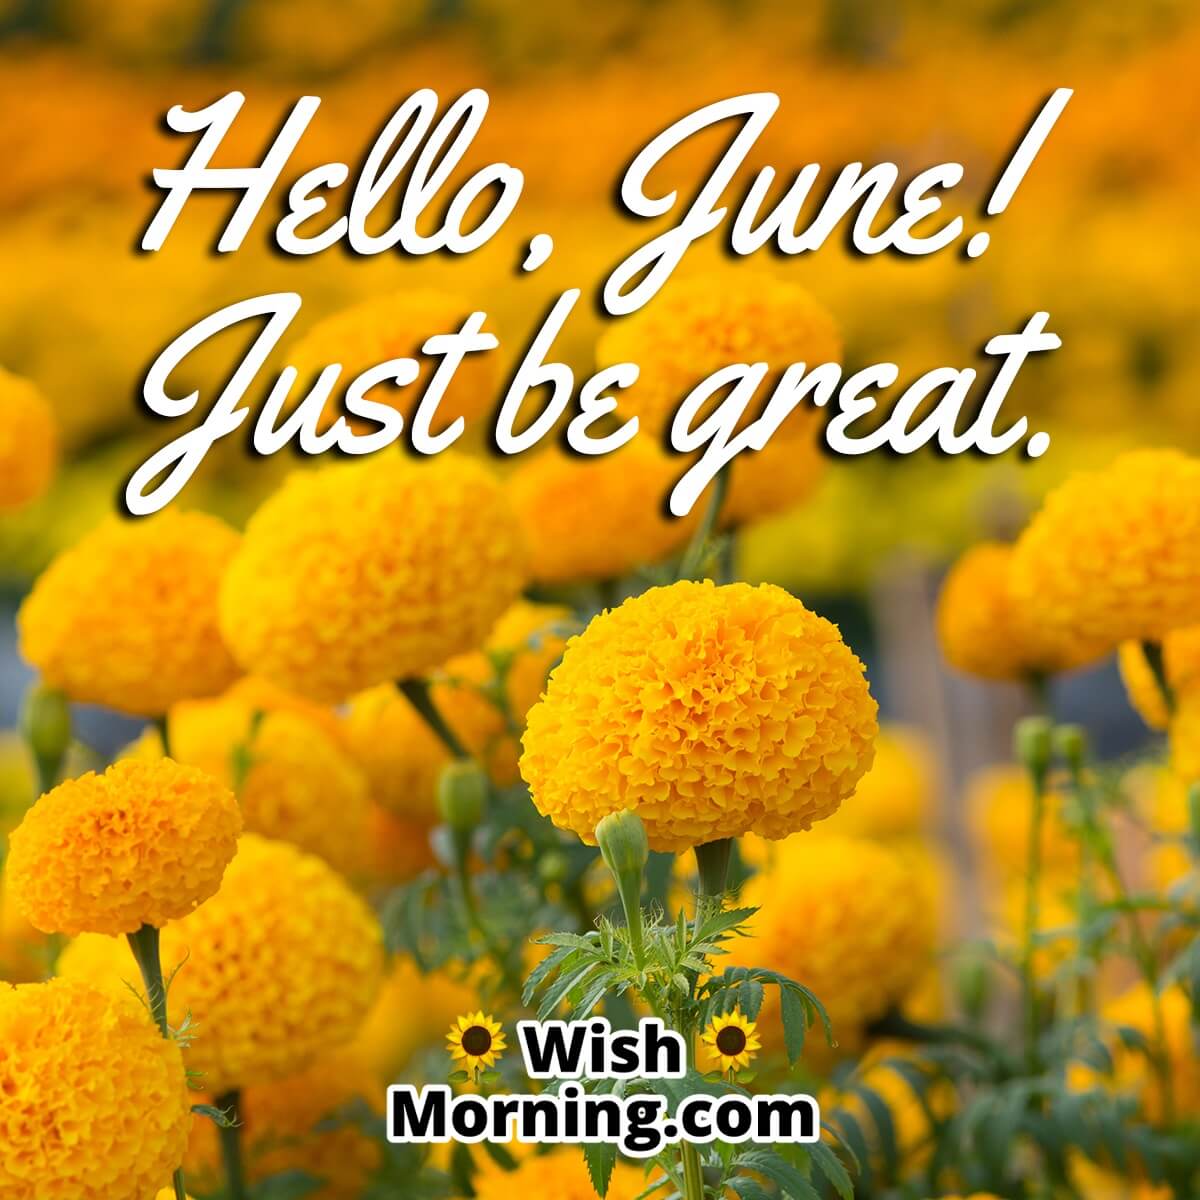 Hello, June! Just be great.